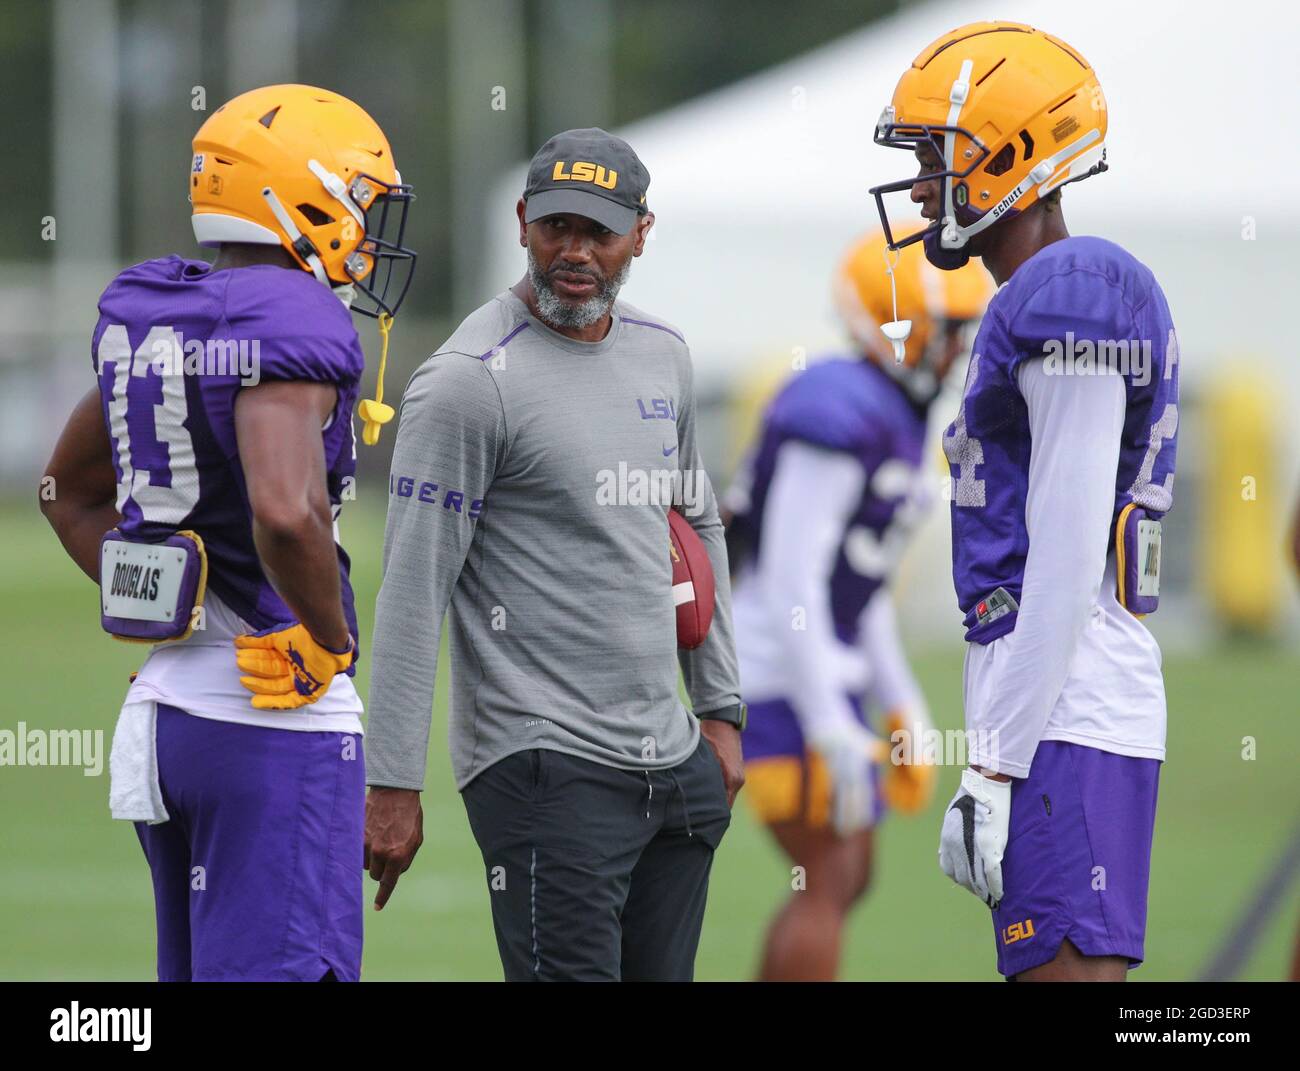 August 10, 2021: LSU Defensive Back Coach Corey Raymond talks with Lloyd Cole (33) and Darren Evans (24) during the first week of fall football camp at the LSU Charles McClendon Practice Facility in Baton Rouge, LA. Jonathan Mailhes/CSM Stock Photo